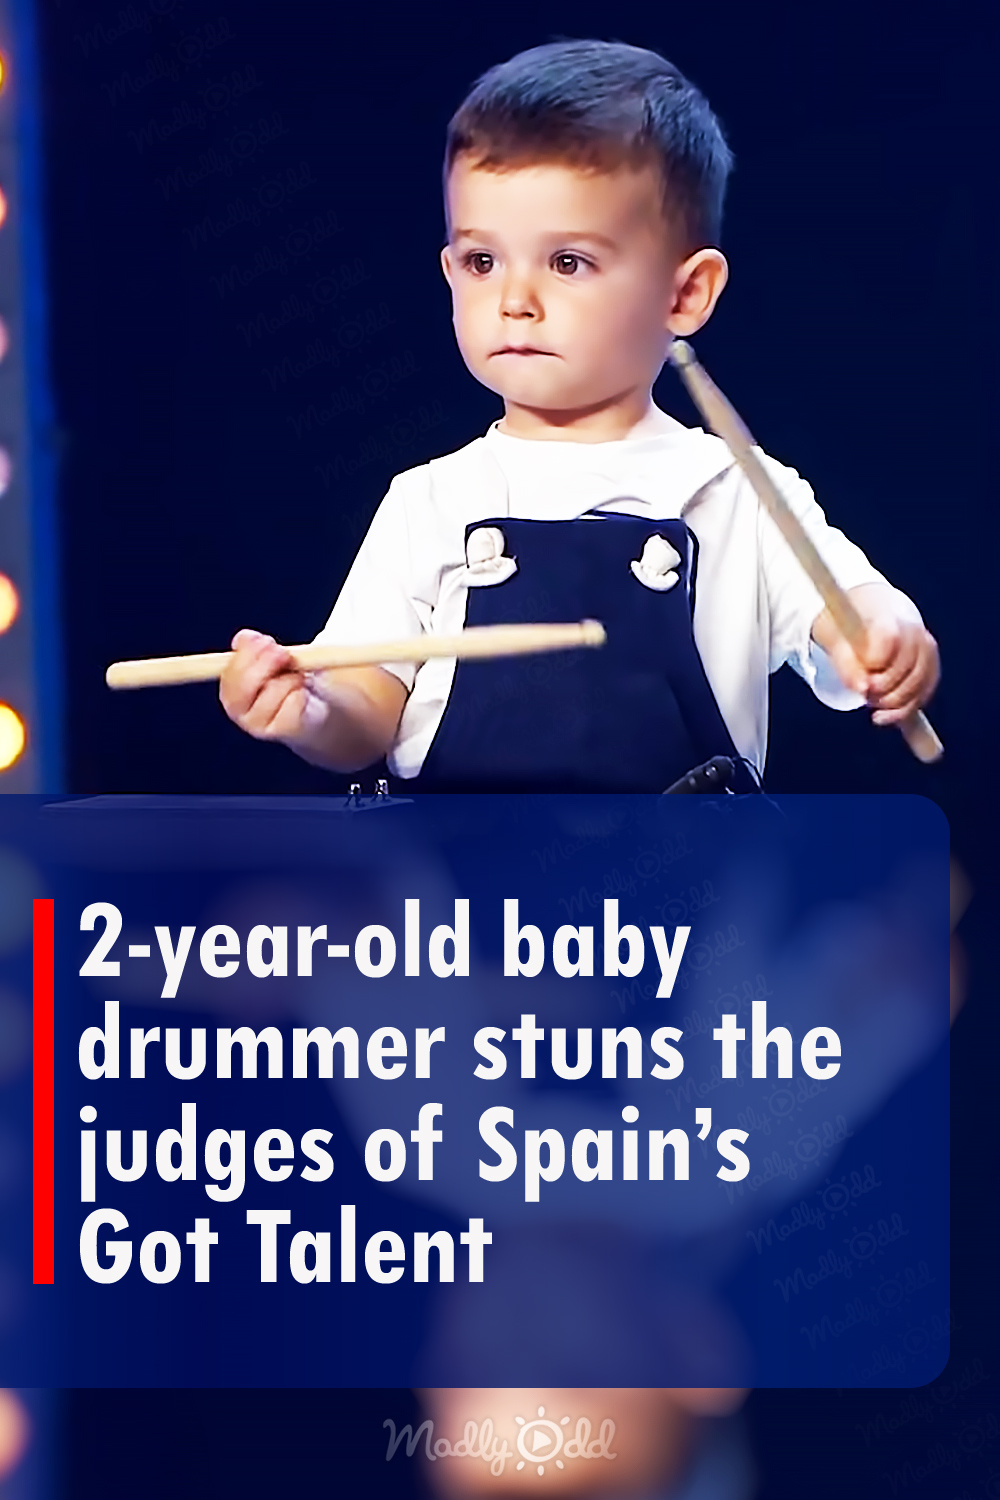 2-year-old baby drummer stuns the judges of Spain’s Got Talent